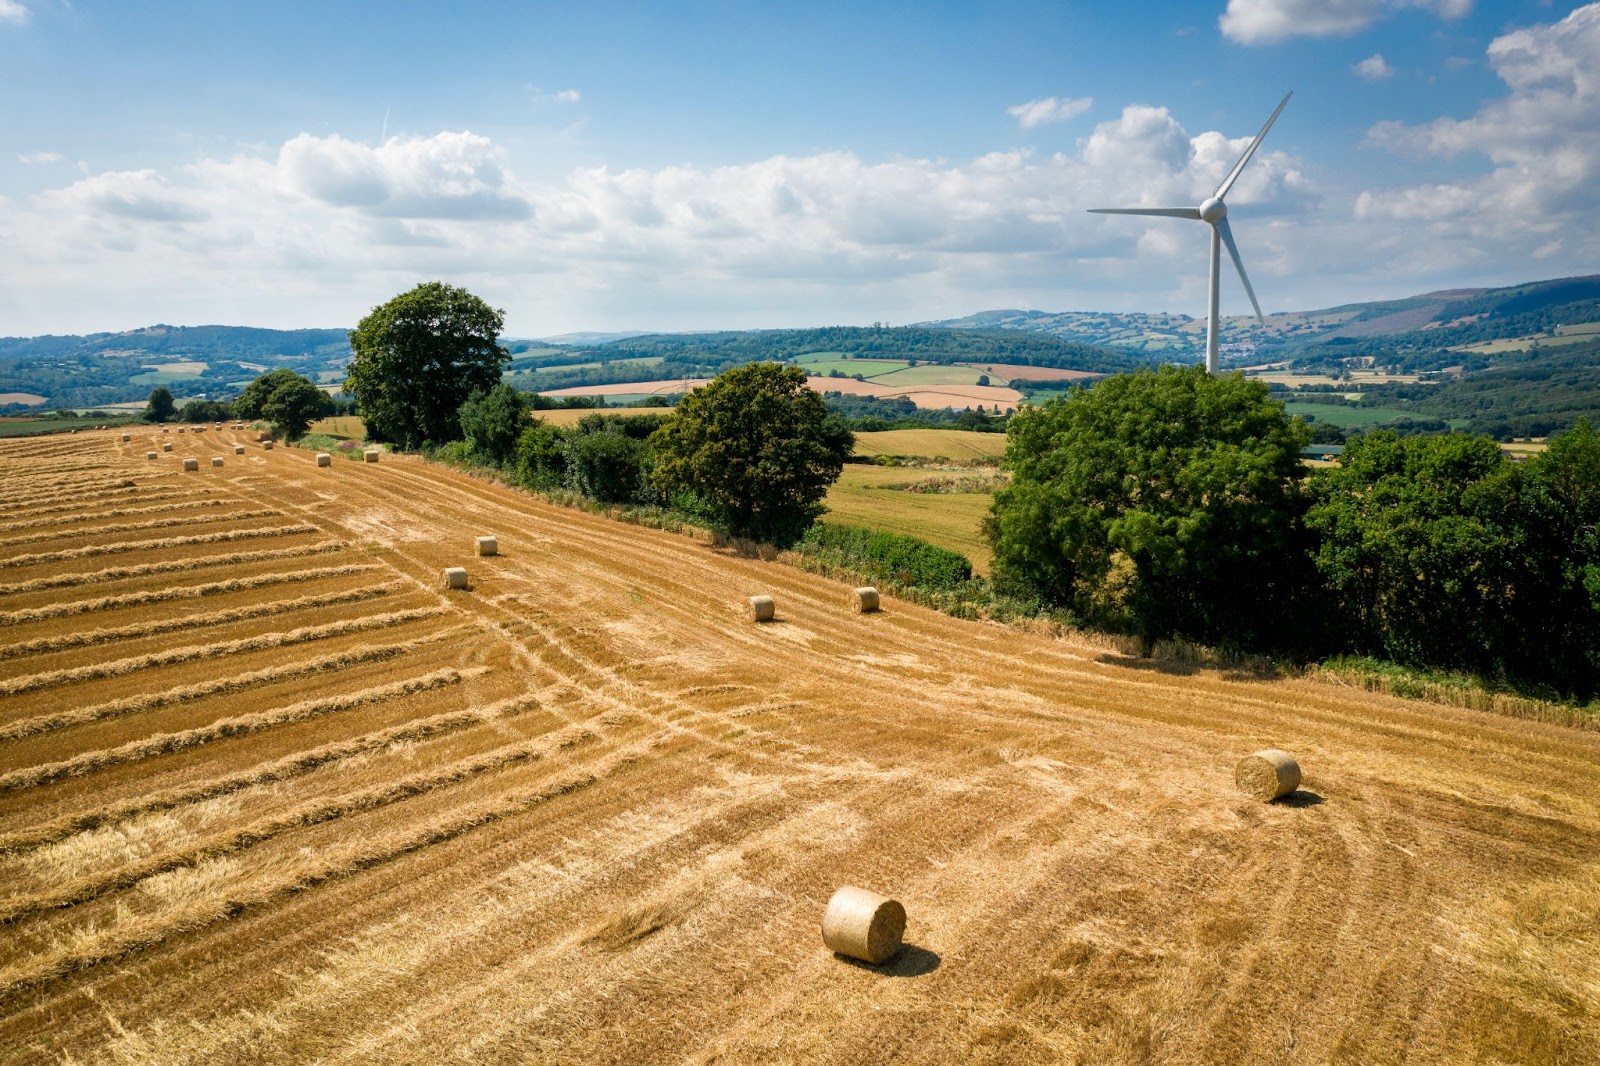 British countryside view showing farmers field, hay bales and a wind turbine on a sunny day